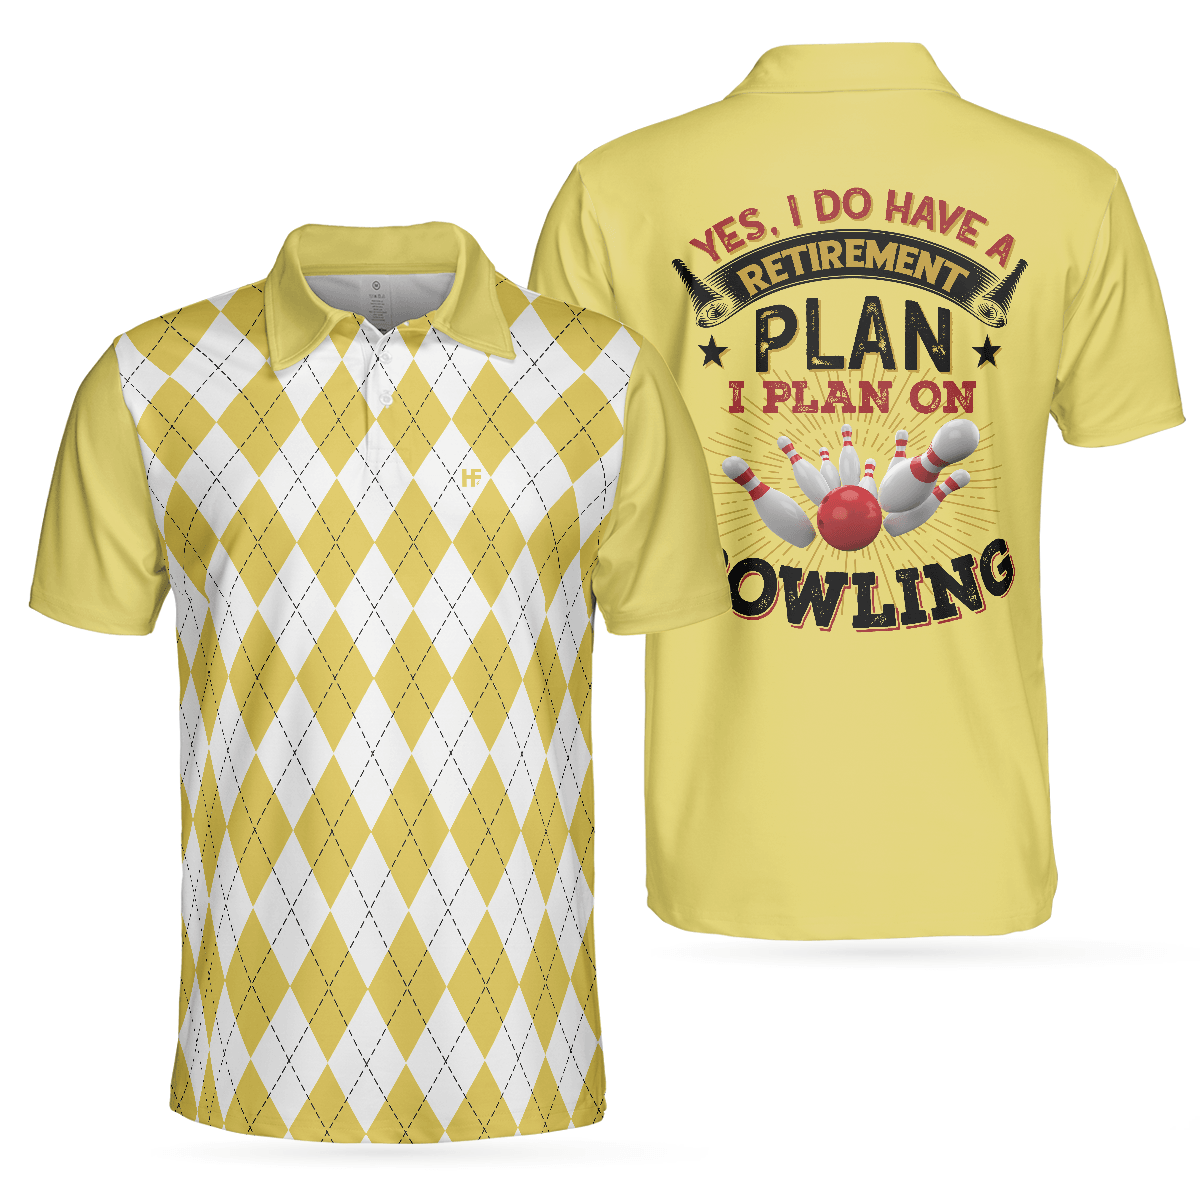 Men Bowling Polo Shirt - Yes I Do Have A Retirement Plan I Plan On Bowling Polo Shirt, Yellow Argyle Pattern Shirt, Gift For Bowlers - Perfect Gift For Men - Amzanimalsgift